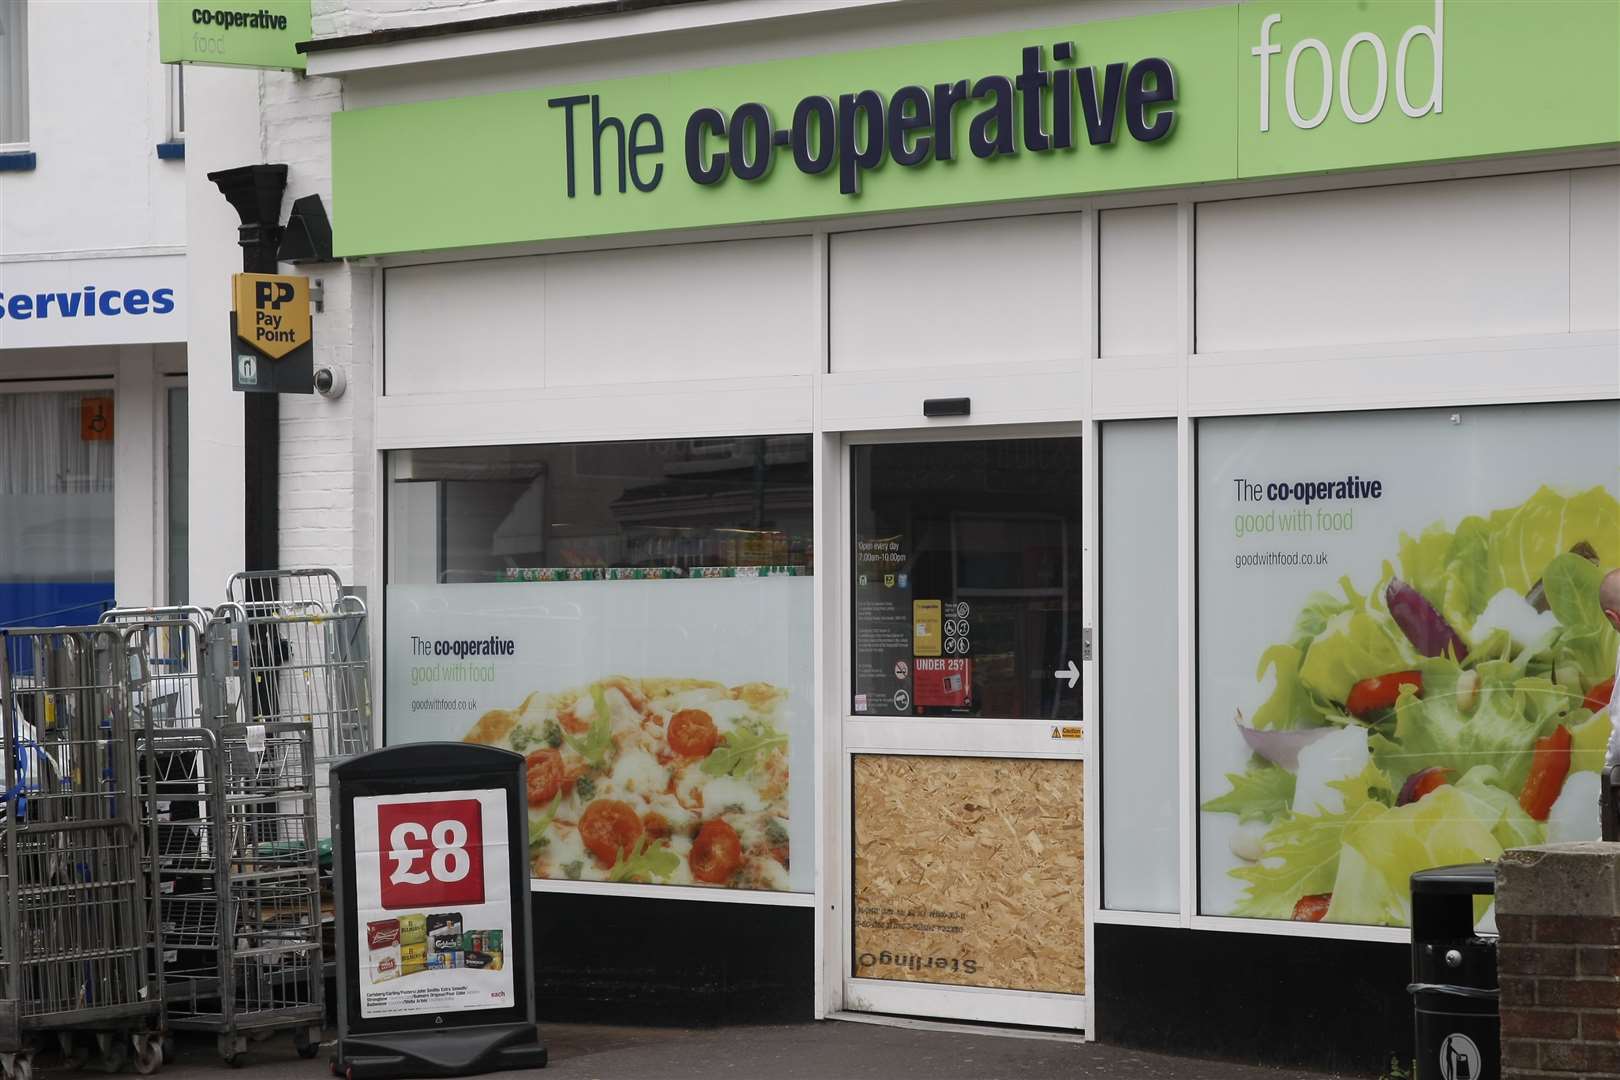 Waddington targeted the Co-op store twice.